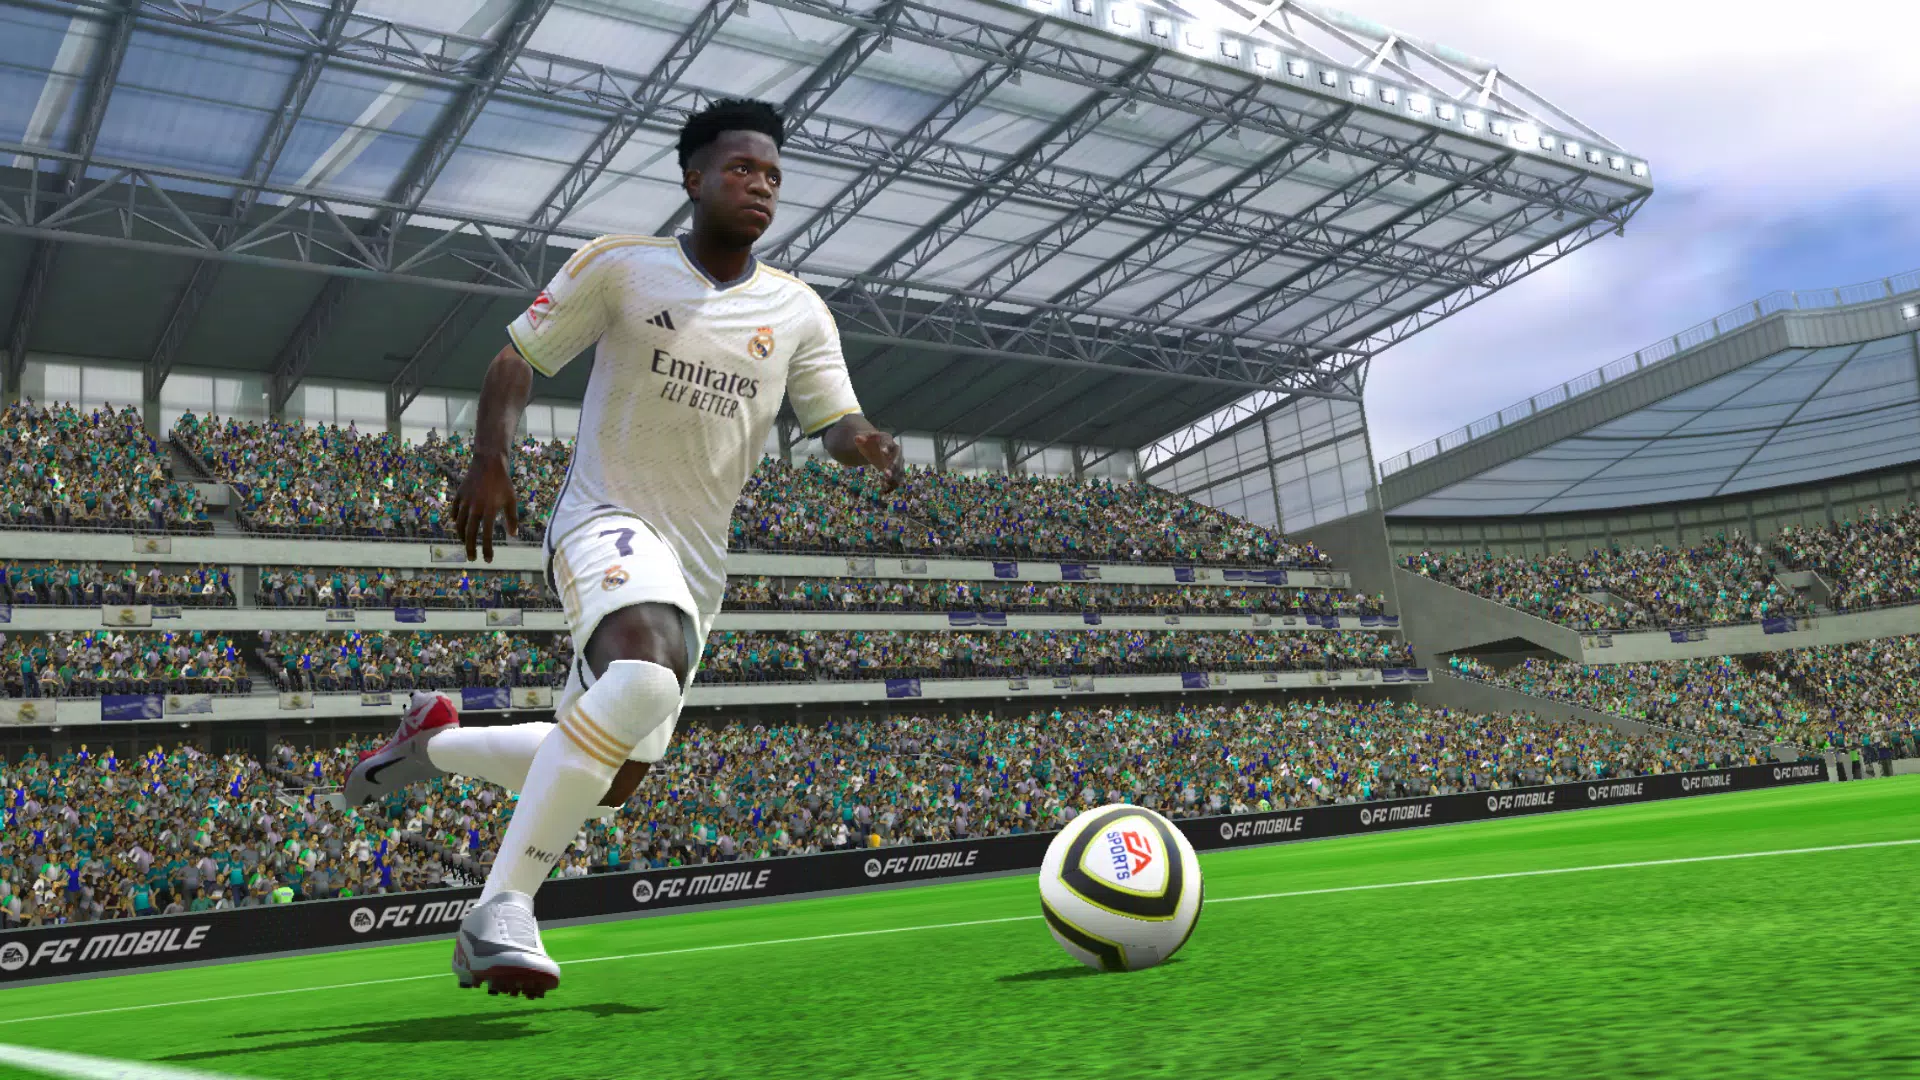 EA Sports FC 24 mobile direct APK download link for Android - EA